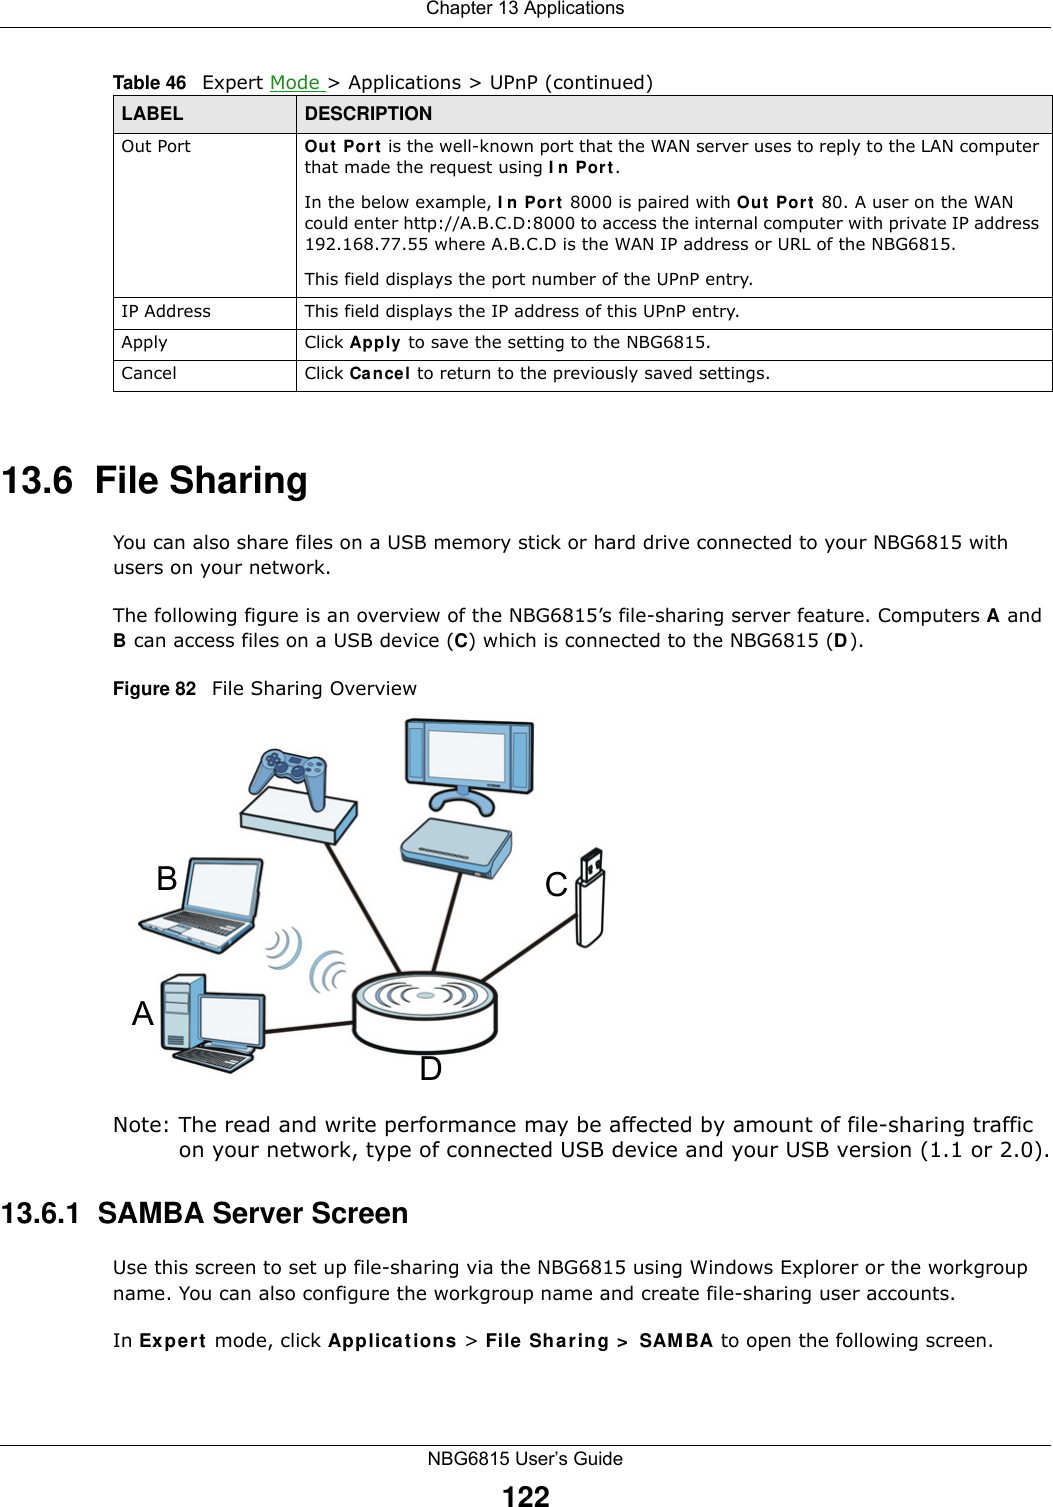 Chapter 13 ApplicationsNBG6815 User’s Guide12213.6  File SharingYou can also share files on a USB memory stick or hard drive connected to your NBG6815 with users on your network. The following figure is an overview of the NBG6815’s file-sharing server feature. Computers A and B can access files on a USB device (C) which is connected to the NBG6815 (D).Figure 82   File Sharing OverviewNote: The read and write performance may be affected by amount of file-sharing traffic on your network, type of connected USB device and your USB version (1.1 or 2.0).13.6.1  SAMBA Server ScreenUse this screen to set up file-sharing via the NBG6815 using Windows Explorer or the workgroup name. You can also configure the workgroup name and create file-sharing user accounts. In Expert mode, click Applications &gt; File Sharing &gt; SAMBA to open the following screen.Out Port Out Port is the well-known port that the WAN server uses to reply to the LAN computer that made the request using In Port.In the below example, In Port 8000 is paired with Out Port 80. A user on the WAN could enter http://A.B.C.D:8000 to access the internal computer with private IP address 192.168.77.55 where A.B.C.D is the WAN IP address or URL of the NBG6815.This field displays the port number of the UPnP entry.IP Address This field displays the IP address of this UPnP entry.Apply Click Apply to save the setting to the NBG6815.Cancel Click Cancel to return to the previously saved settings.Table 46   Expert Mode &gt; Applications &gt; UPnP (continued)LABEL DESCRIPTIONABCD